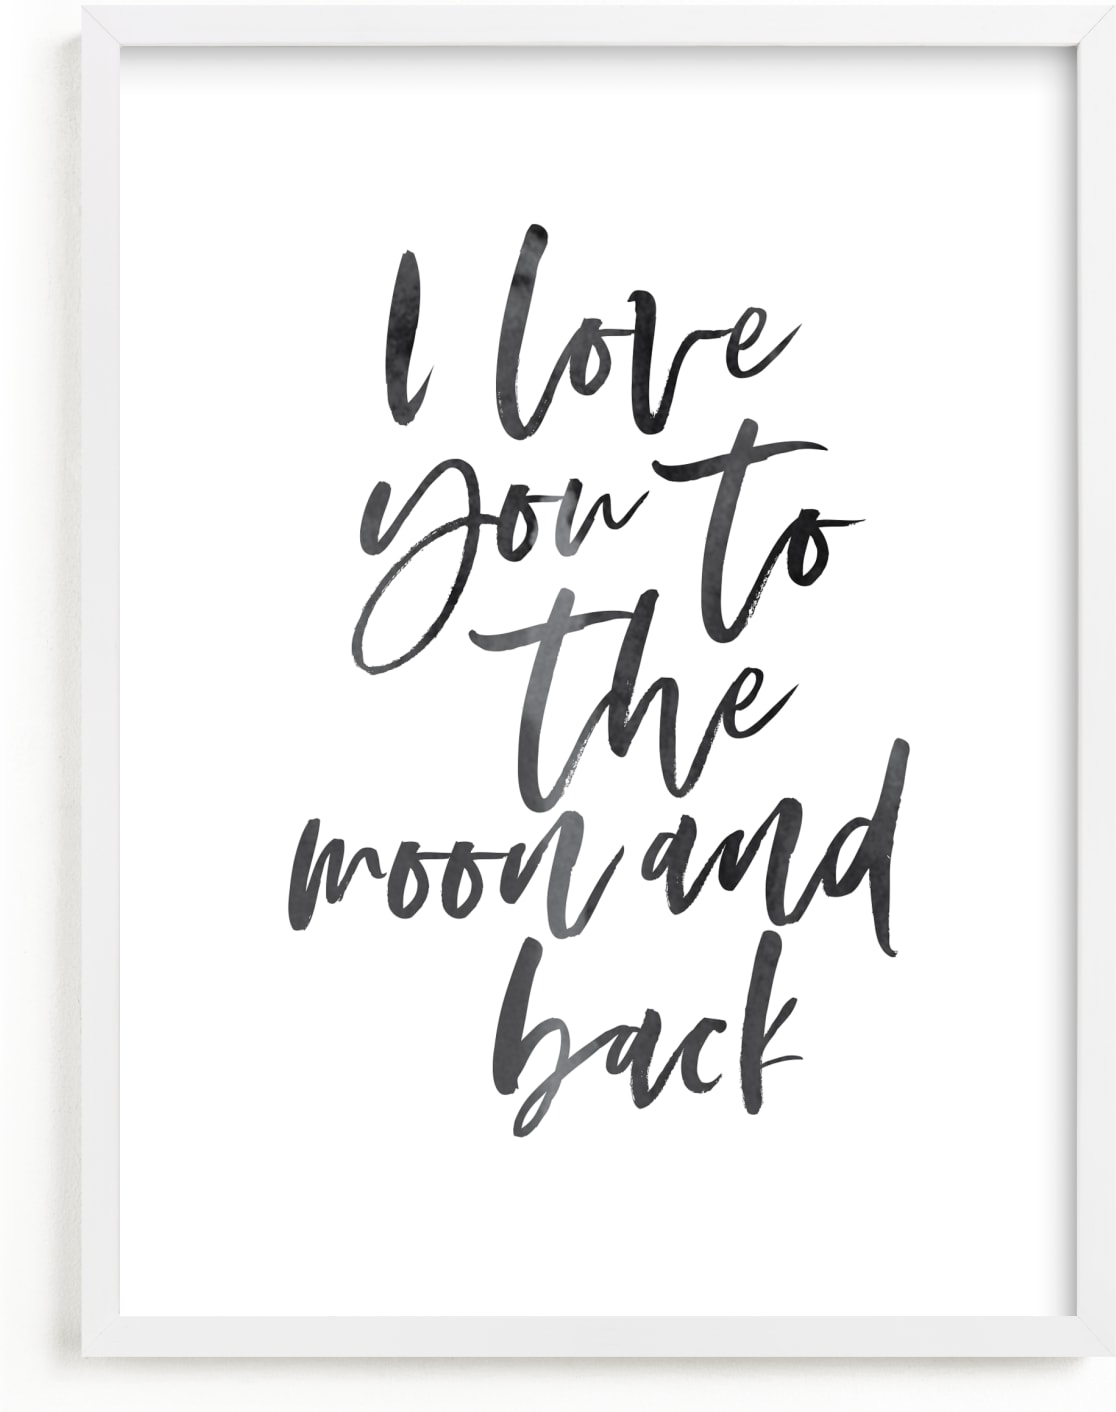 This is a black nursery wall art by Caitlin Considine called I love you to the moon and back.